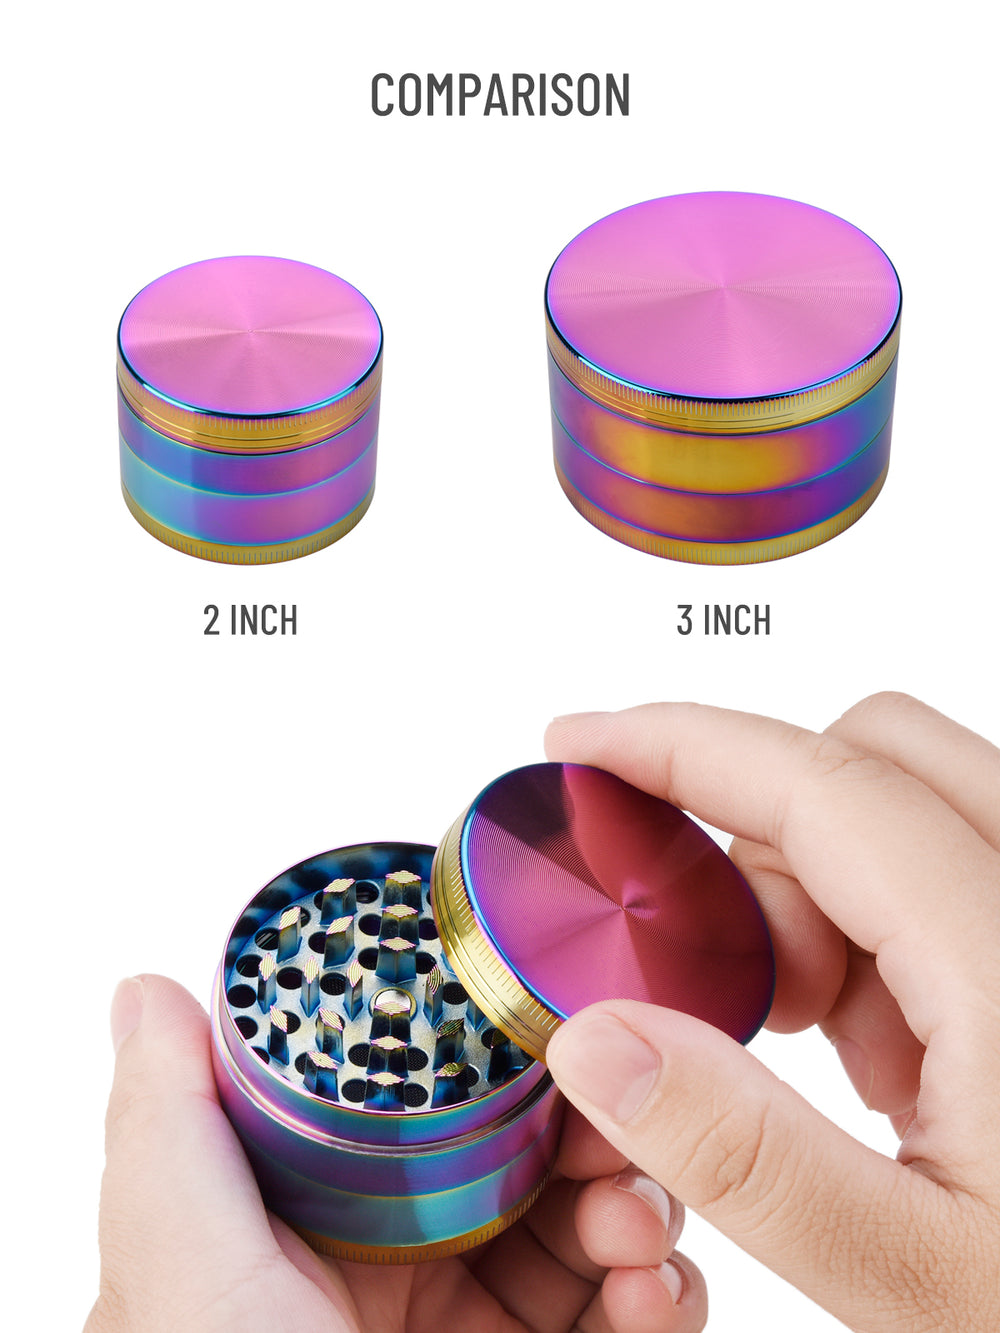 4-layer Spice Grinder, Herb Grinder With Two Filling Tube